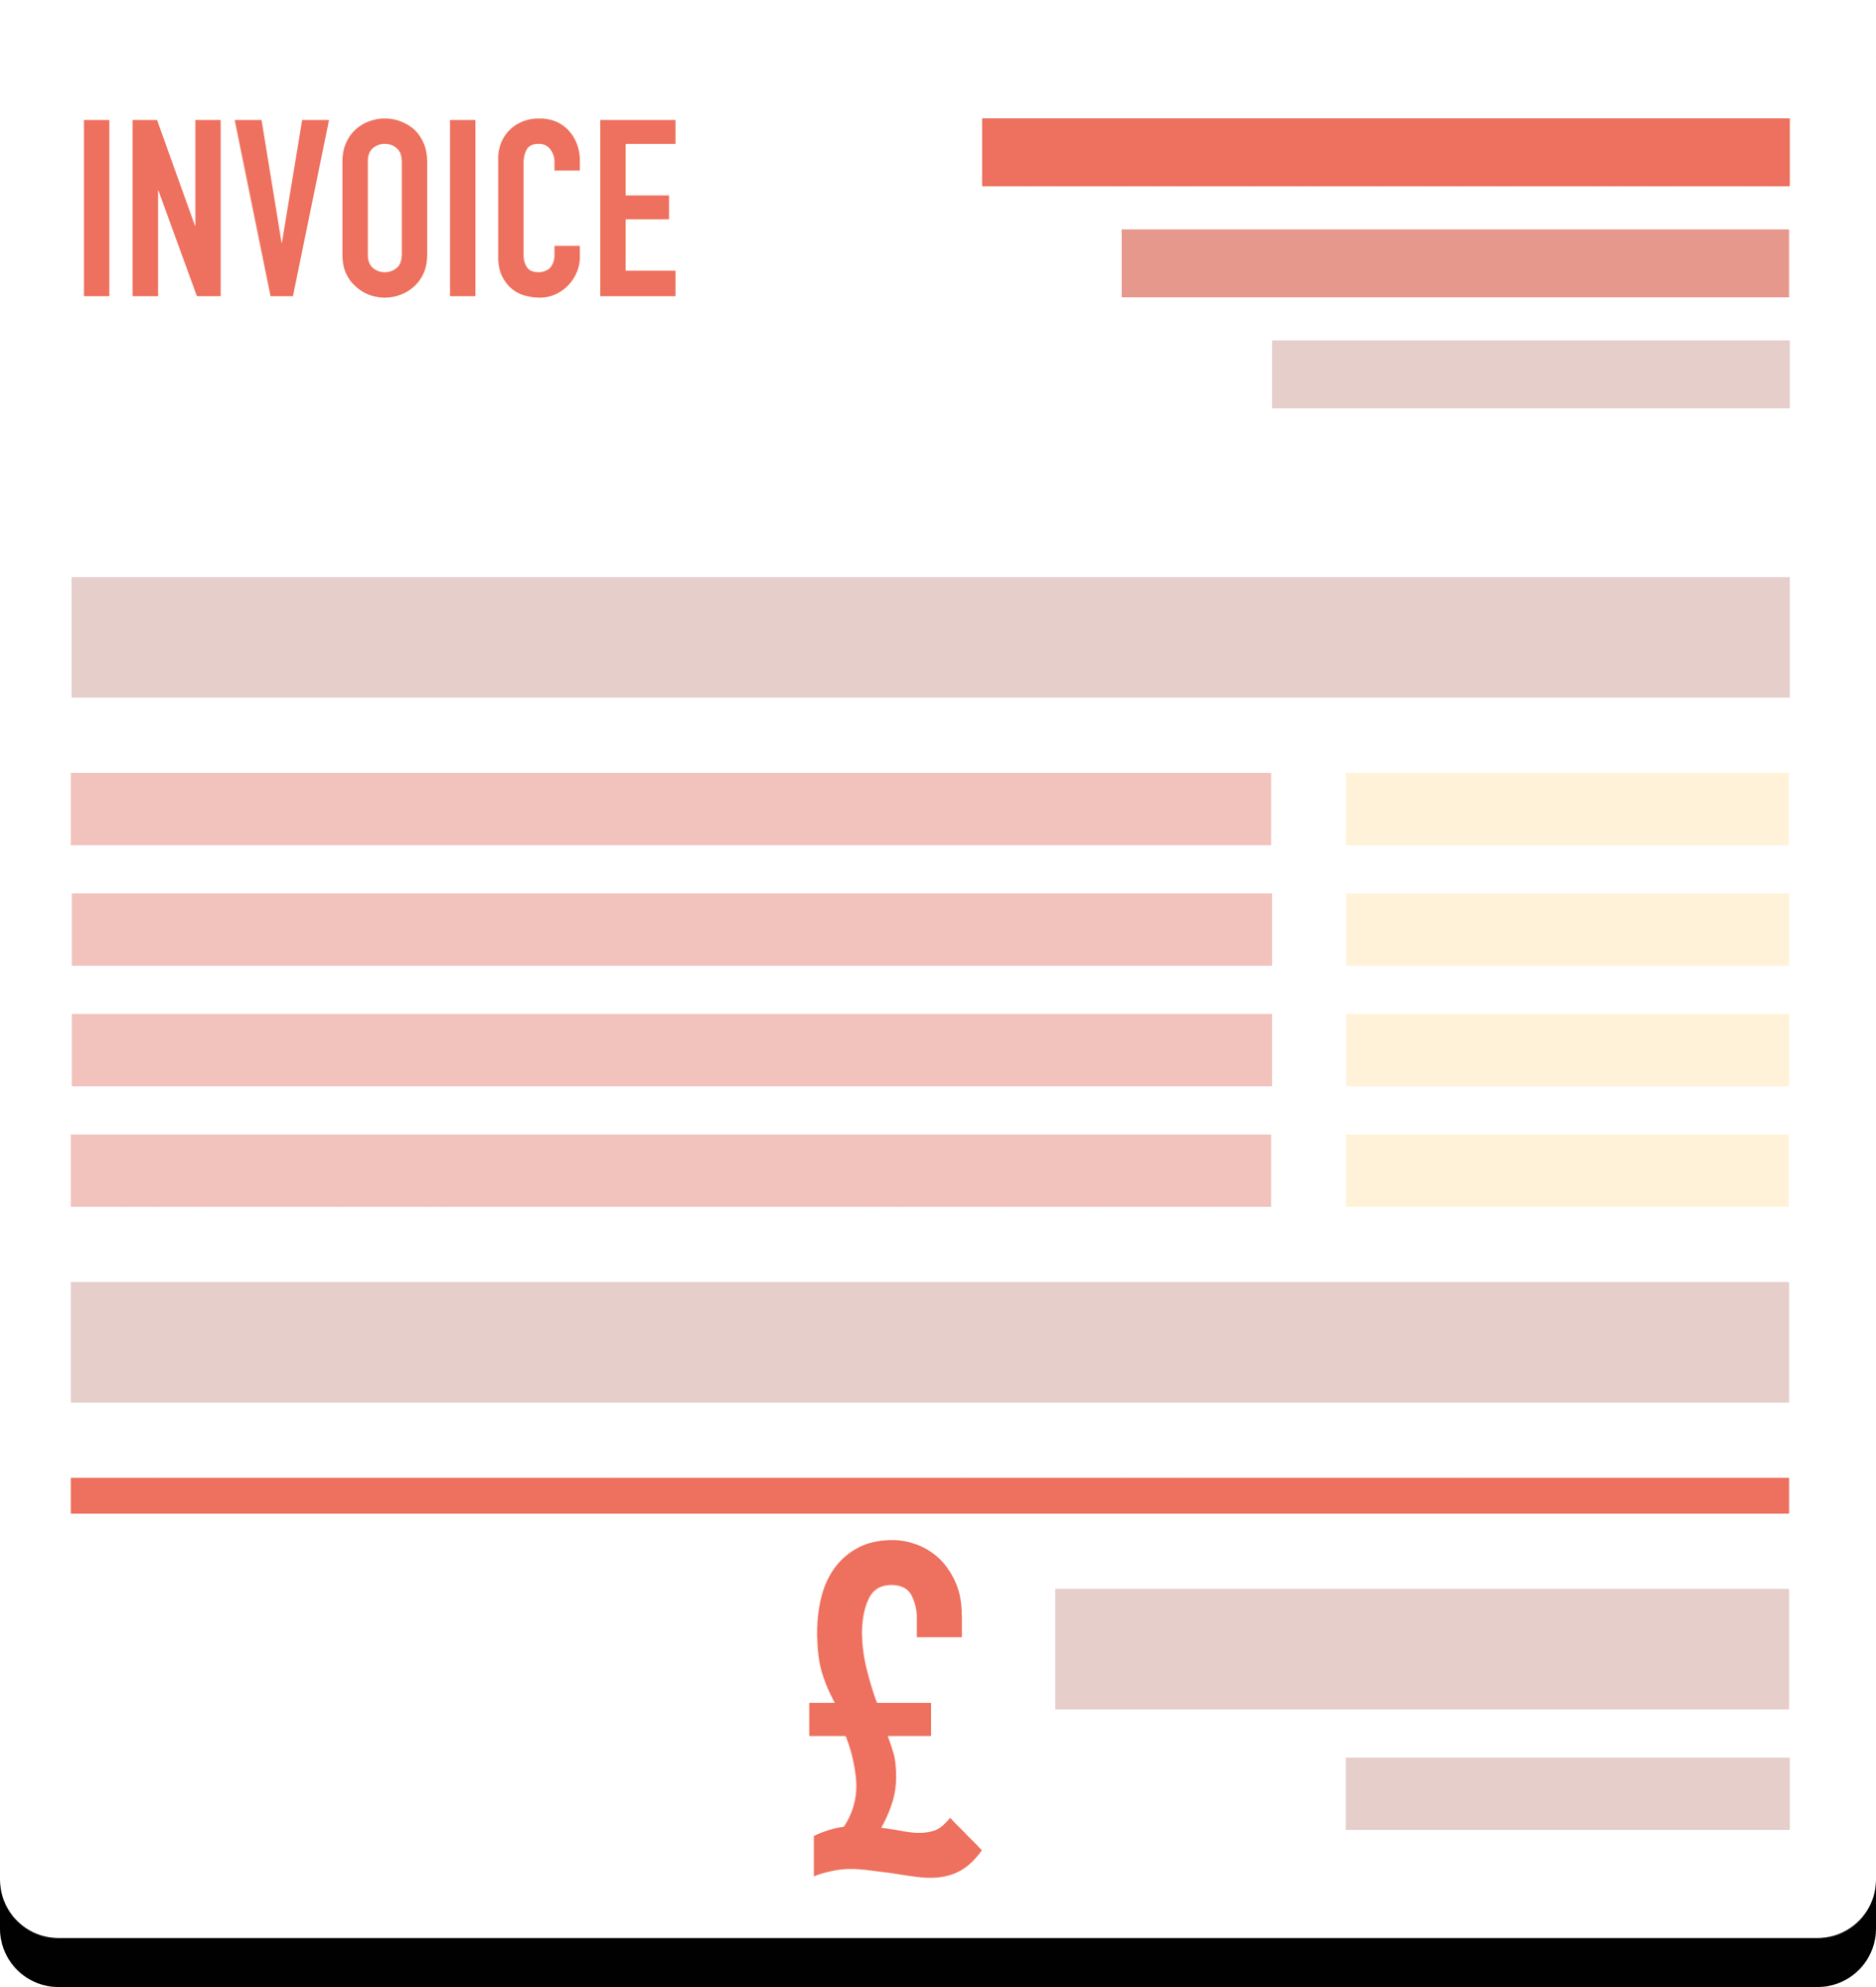 Invoicing App for Plumbing and Heating Companies